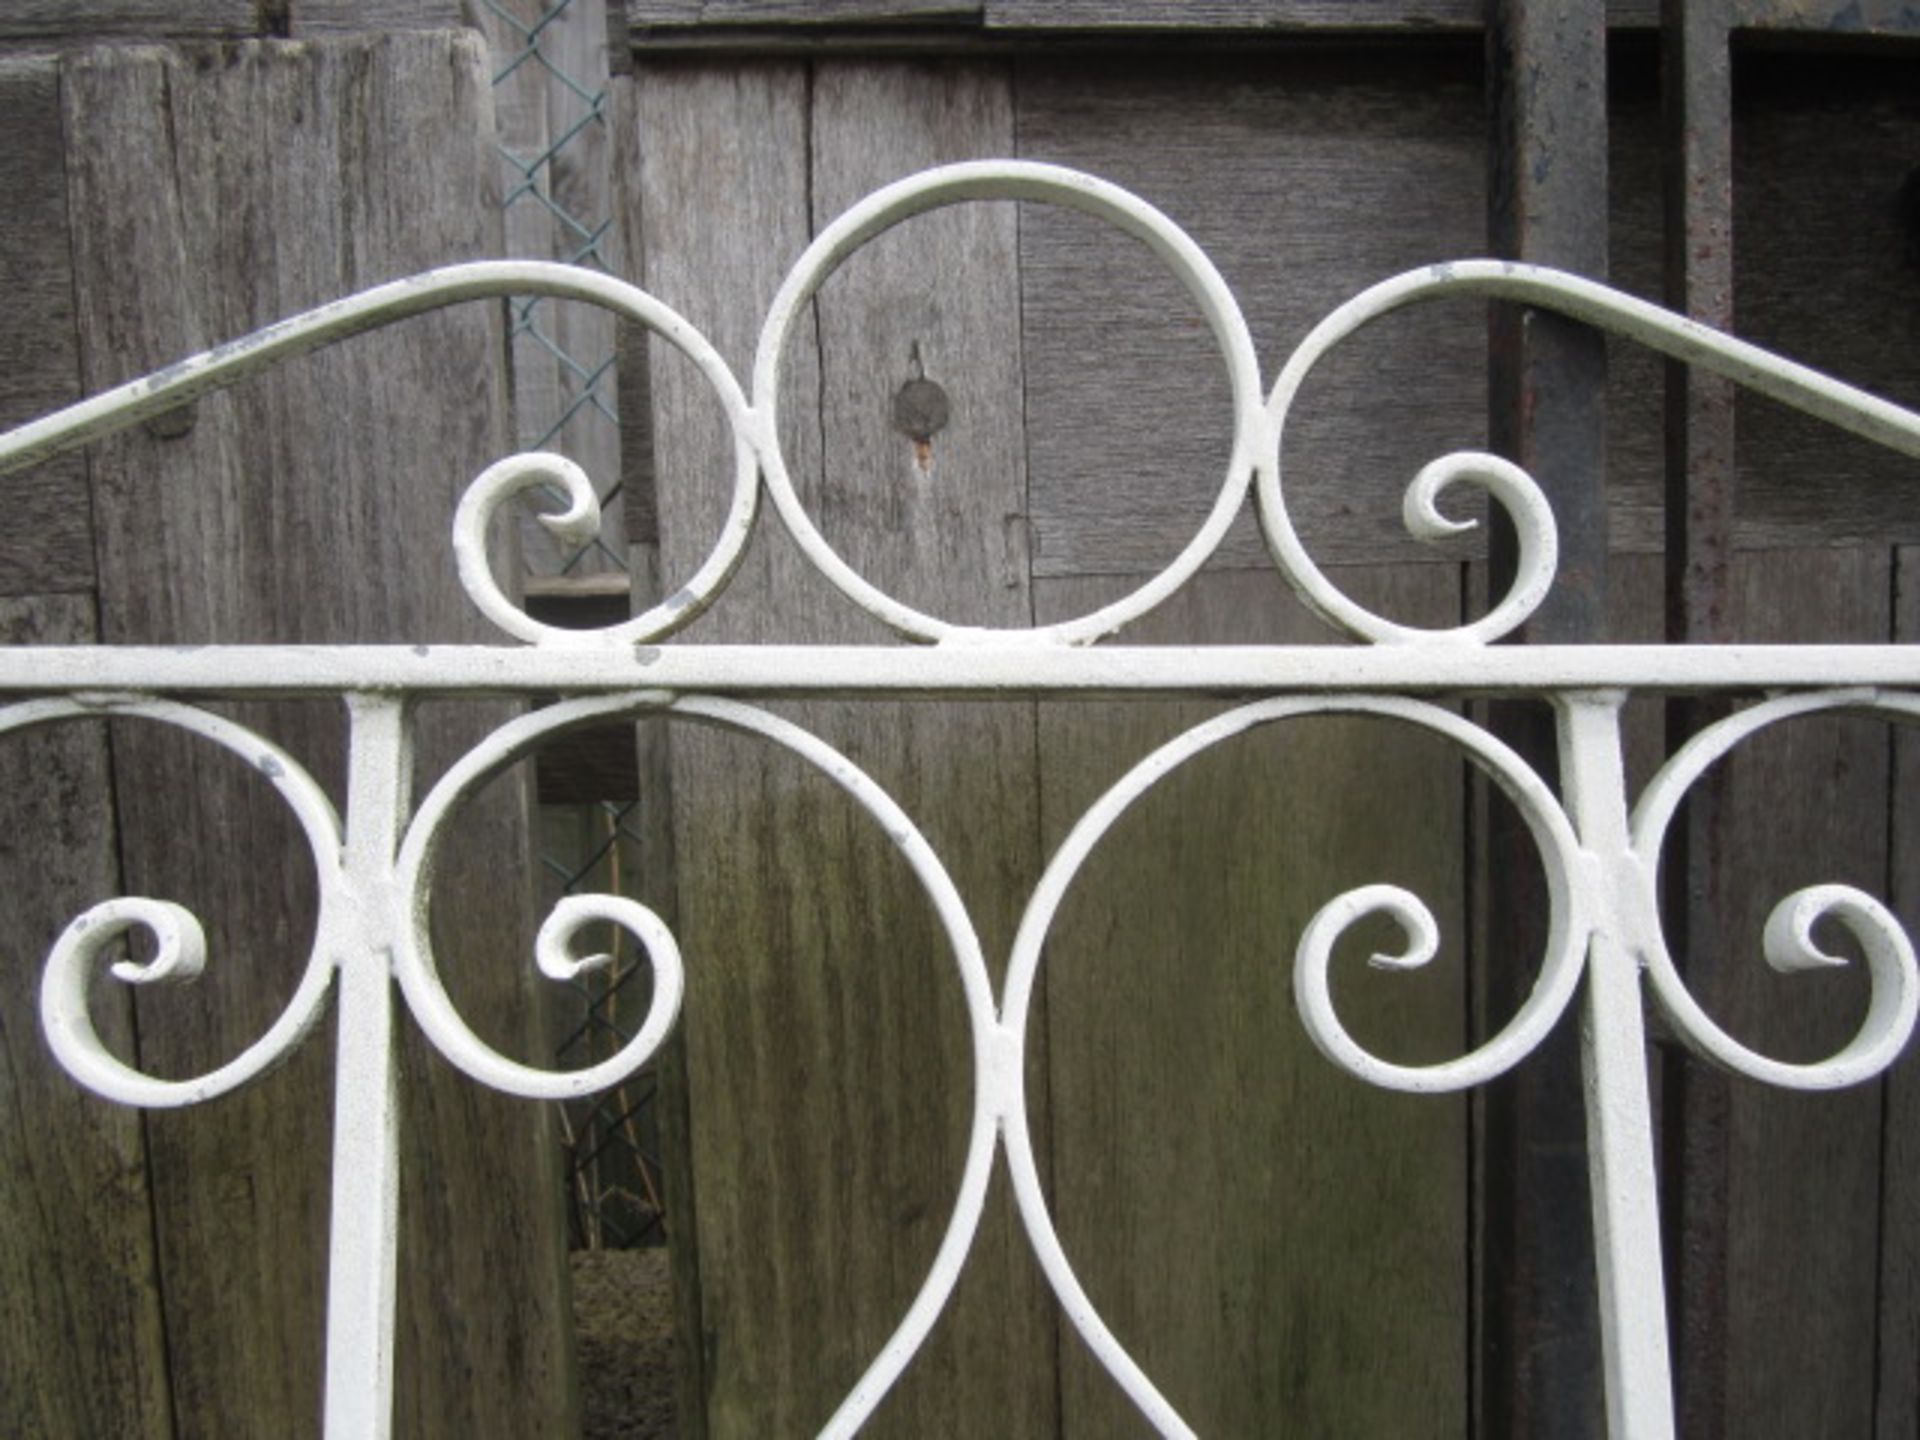 Reclaimed metal ornate single gates, approx. size width: 39" x height: 75". - Image 3 of 4